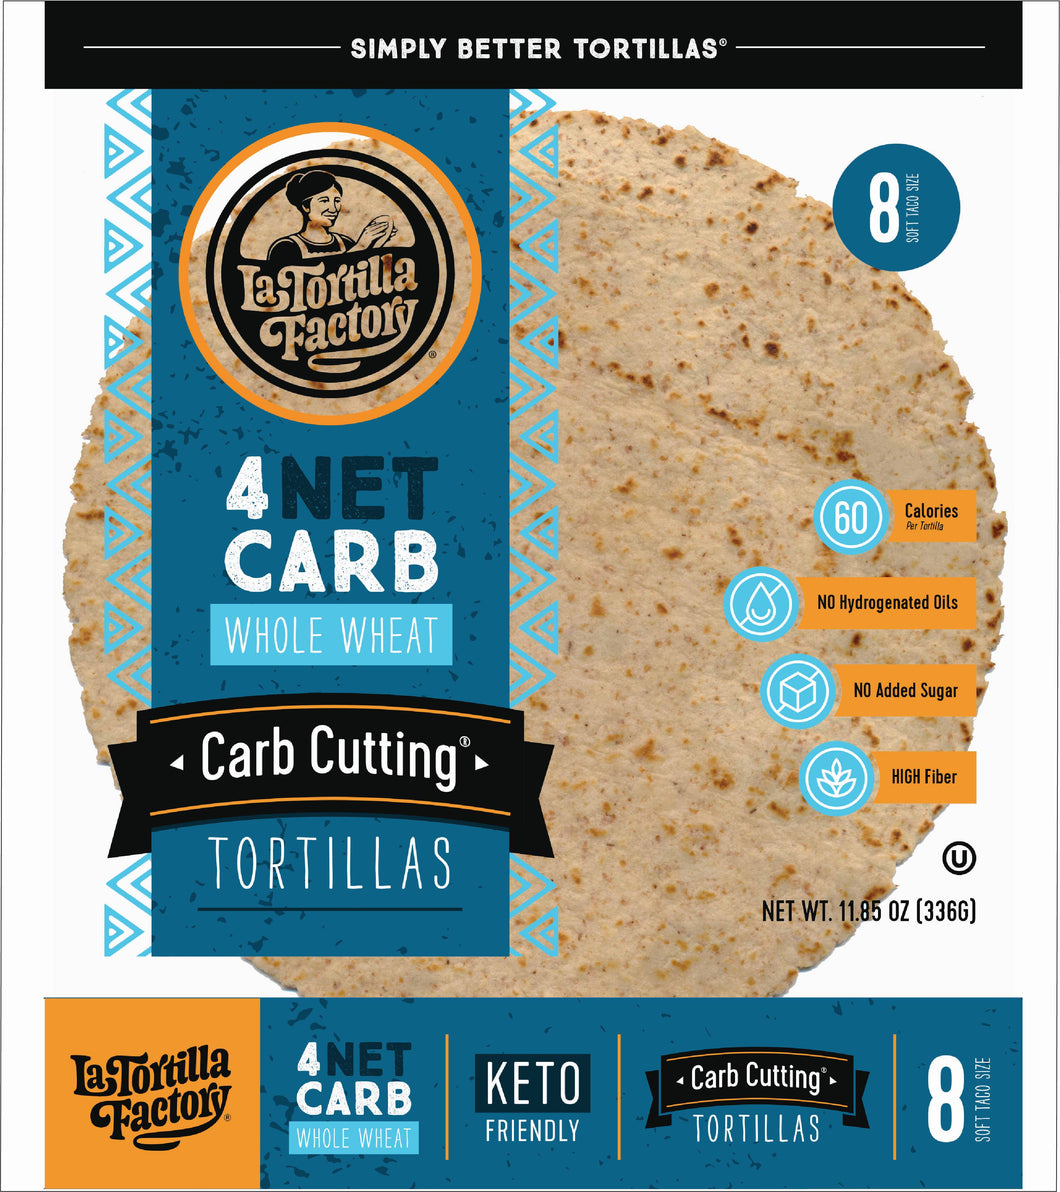 Carb Cutting - 4 Net Carb Whole Wheat Tortillas, Soft Taco - 6 pack